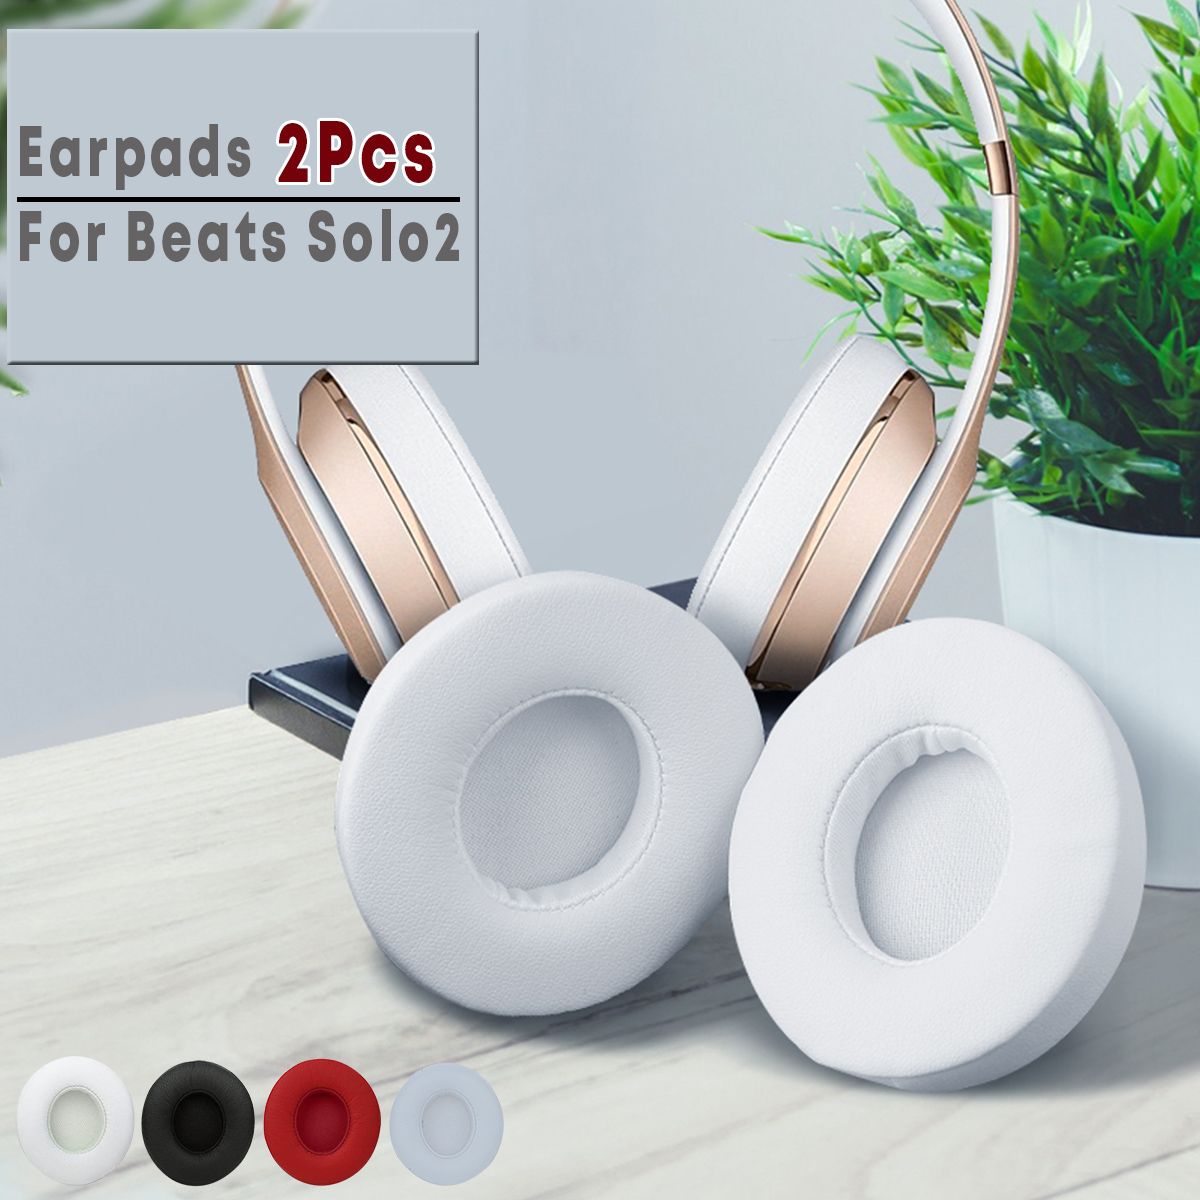 2Pcs-Replacement-Ear-Pads-Soft-Cushion-Cover-Earmuff-for-Beats-Solo-2-Headphone-1555379